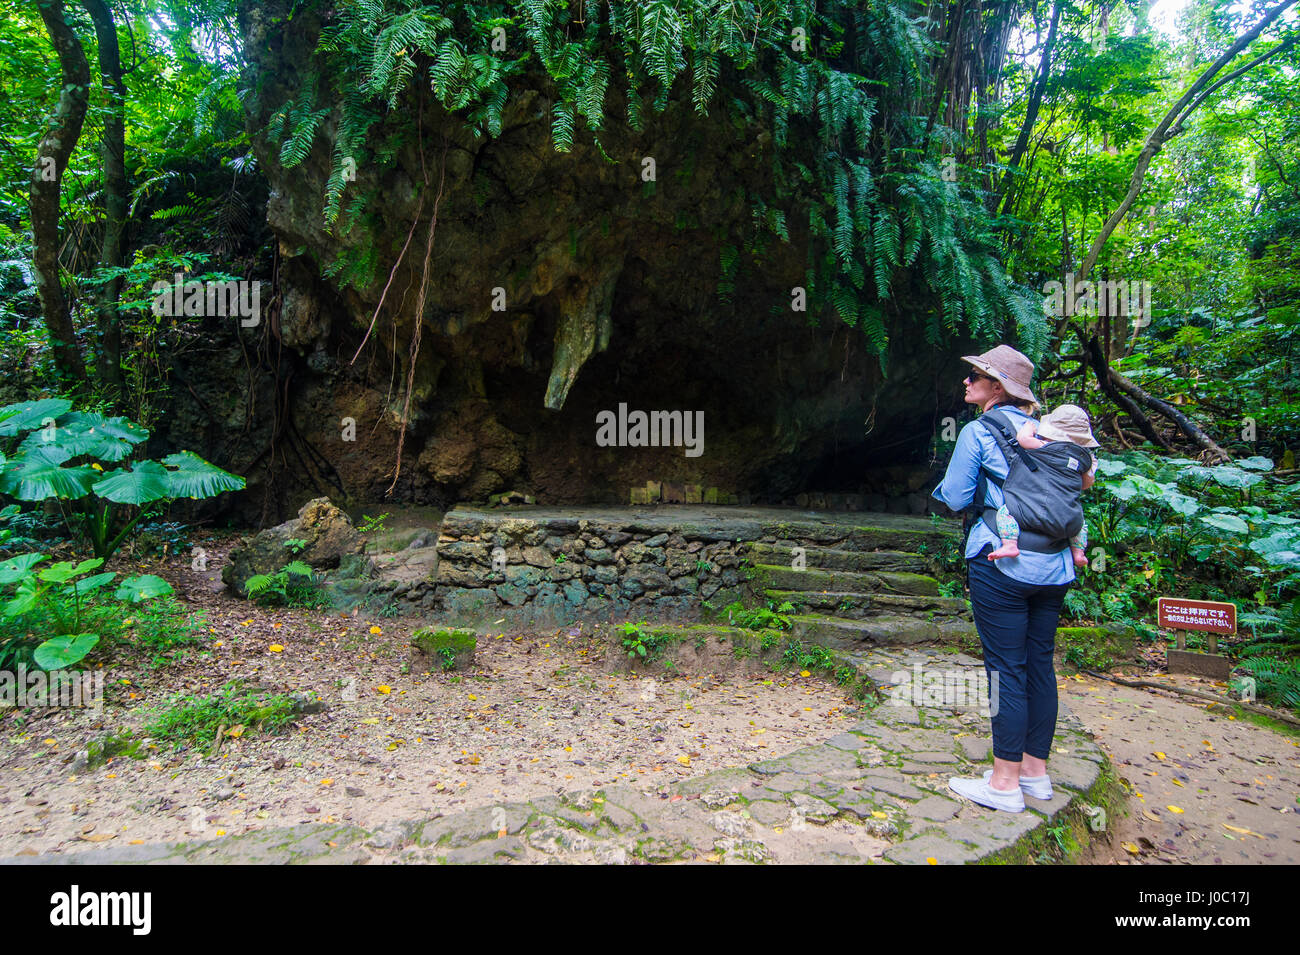 Woman with a baby hiking in the Sacred site of Sefa Utaki, UNESCO World Heritage Site, Okinawa, Japan, Asia Stock Photo